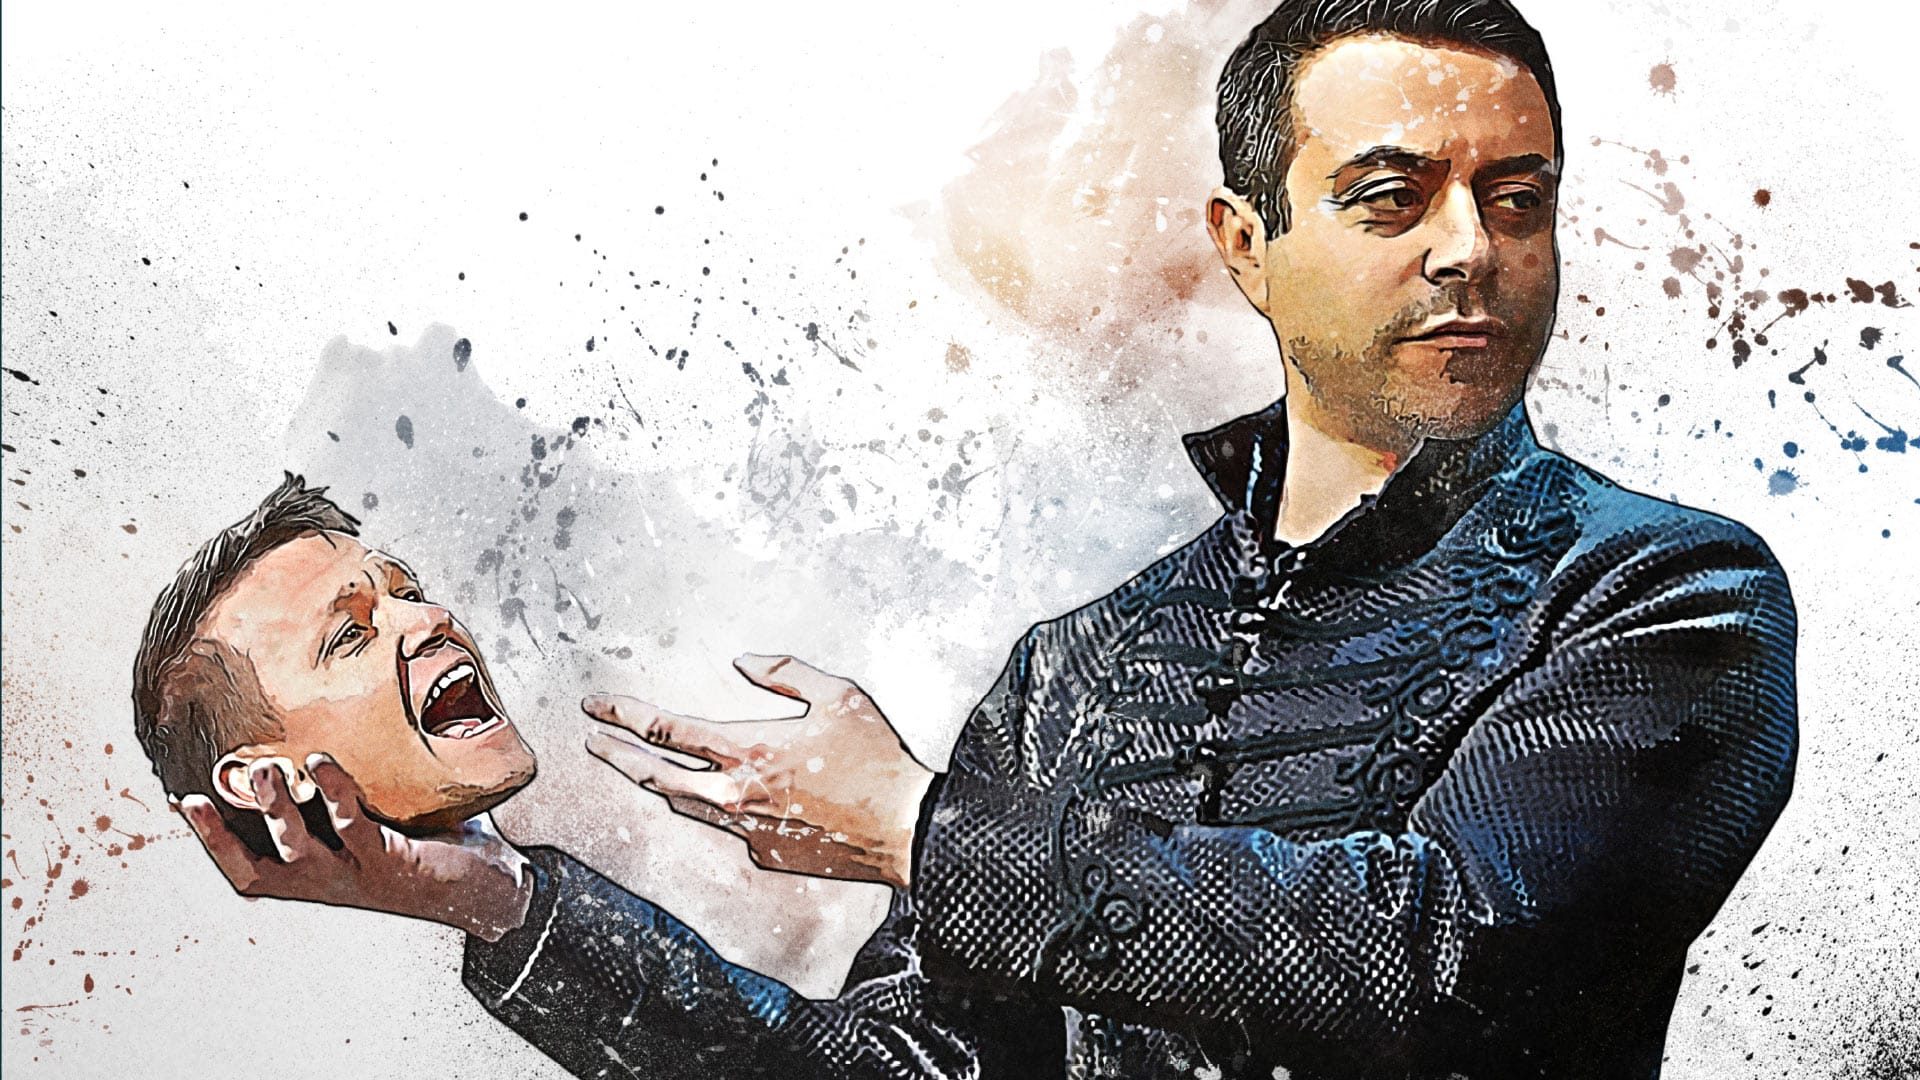 An illustration of Andrea Radrizzani holding the head of Jesse Marsch, like Hamlet holding Yorick's skull. Jesse doesn't look happy about it